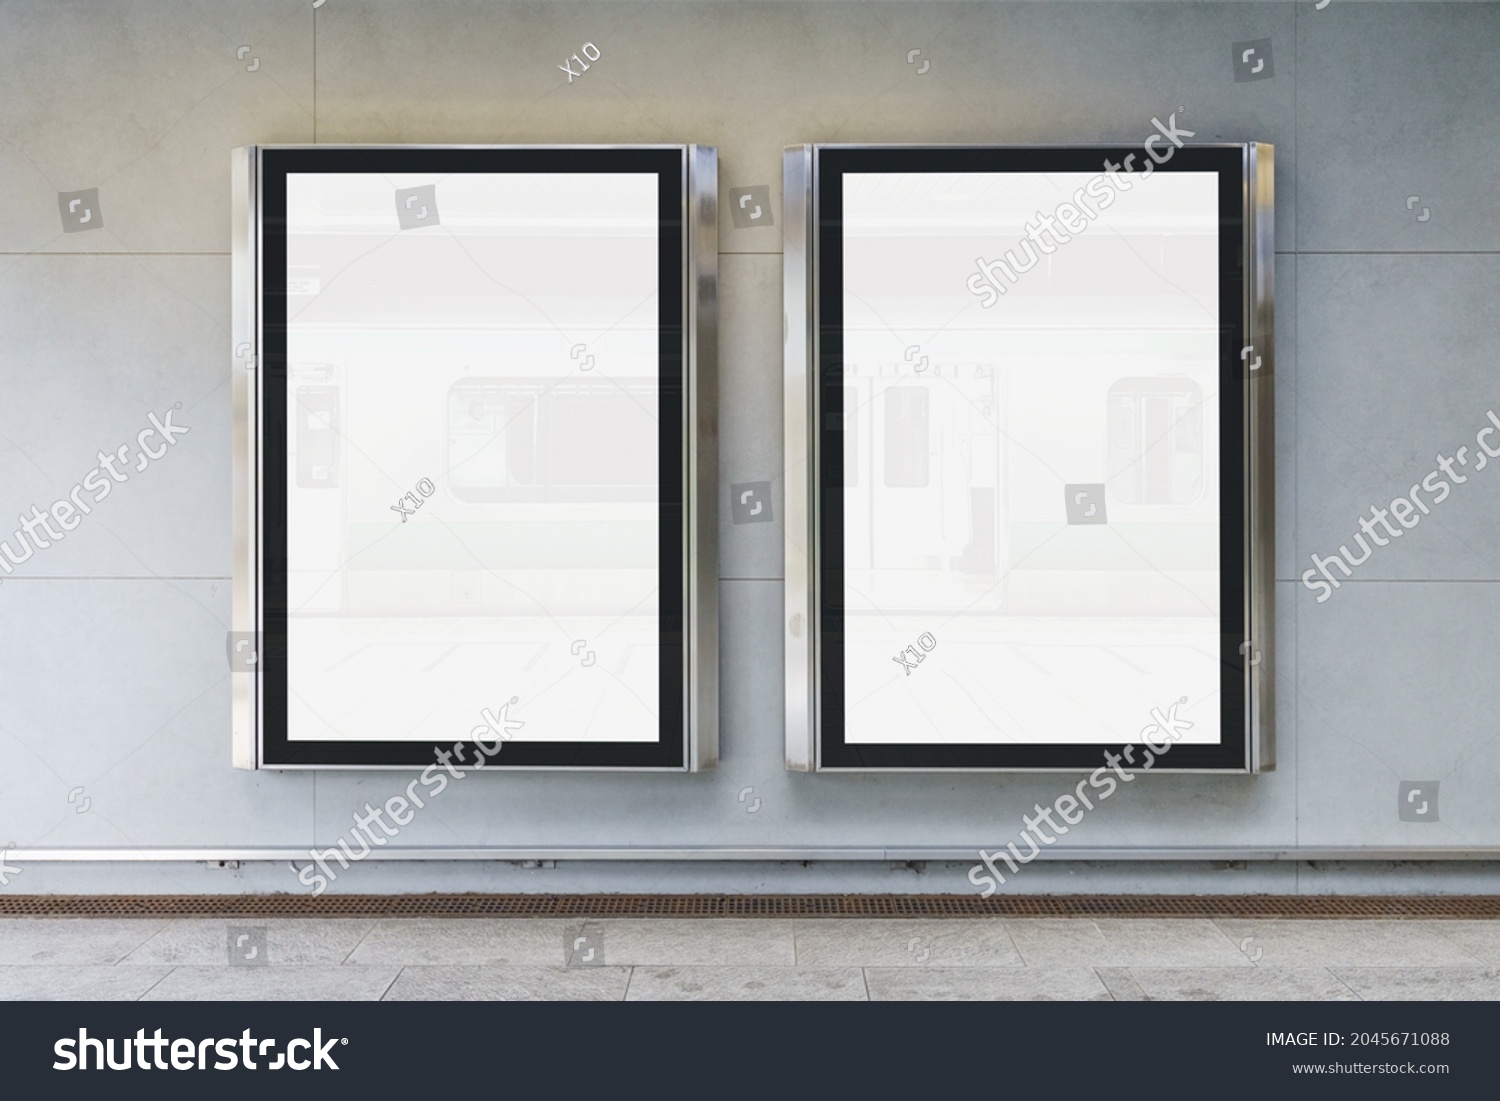 Two indoor outdoor city light mall shop template. Blank billboard mock up in a subway station, underground interior. Urban light box inside advertisement metro airport vertical. #2045671088